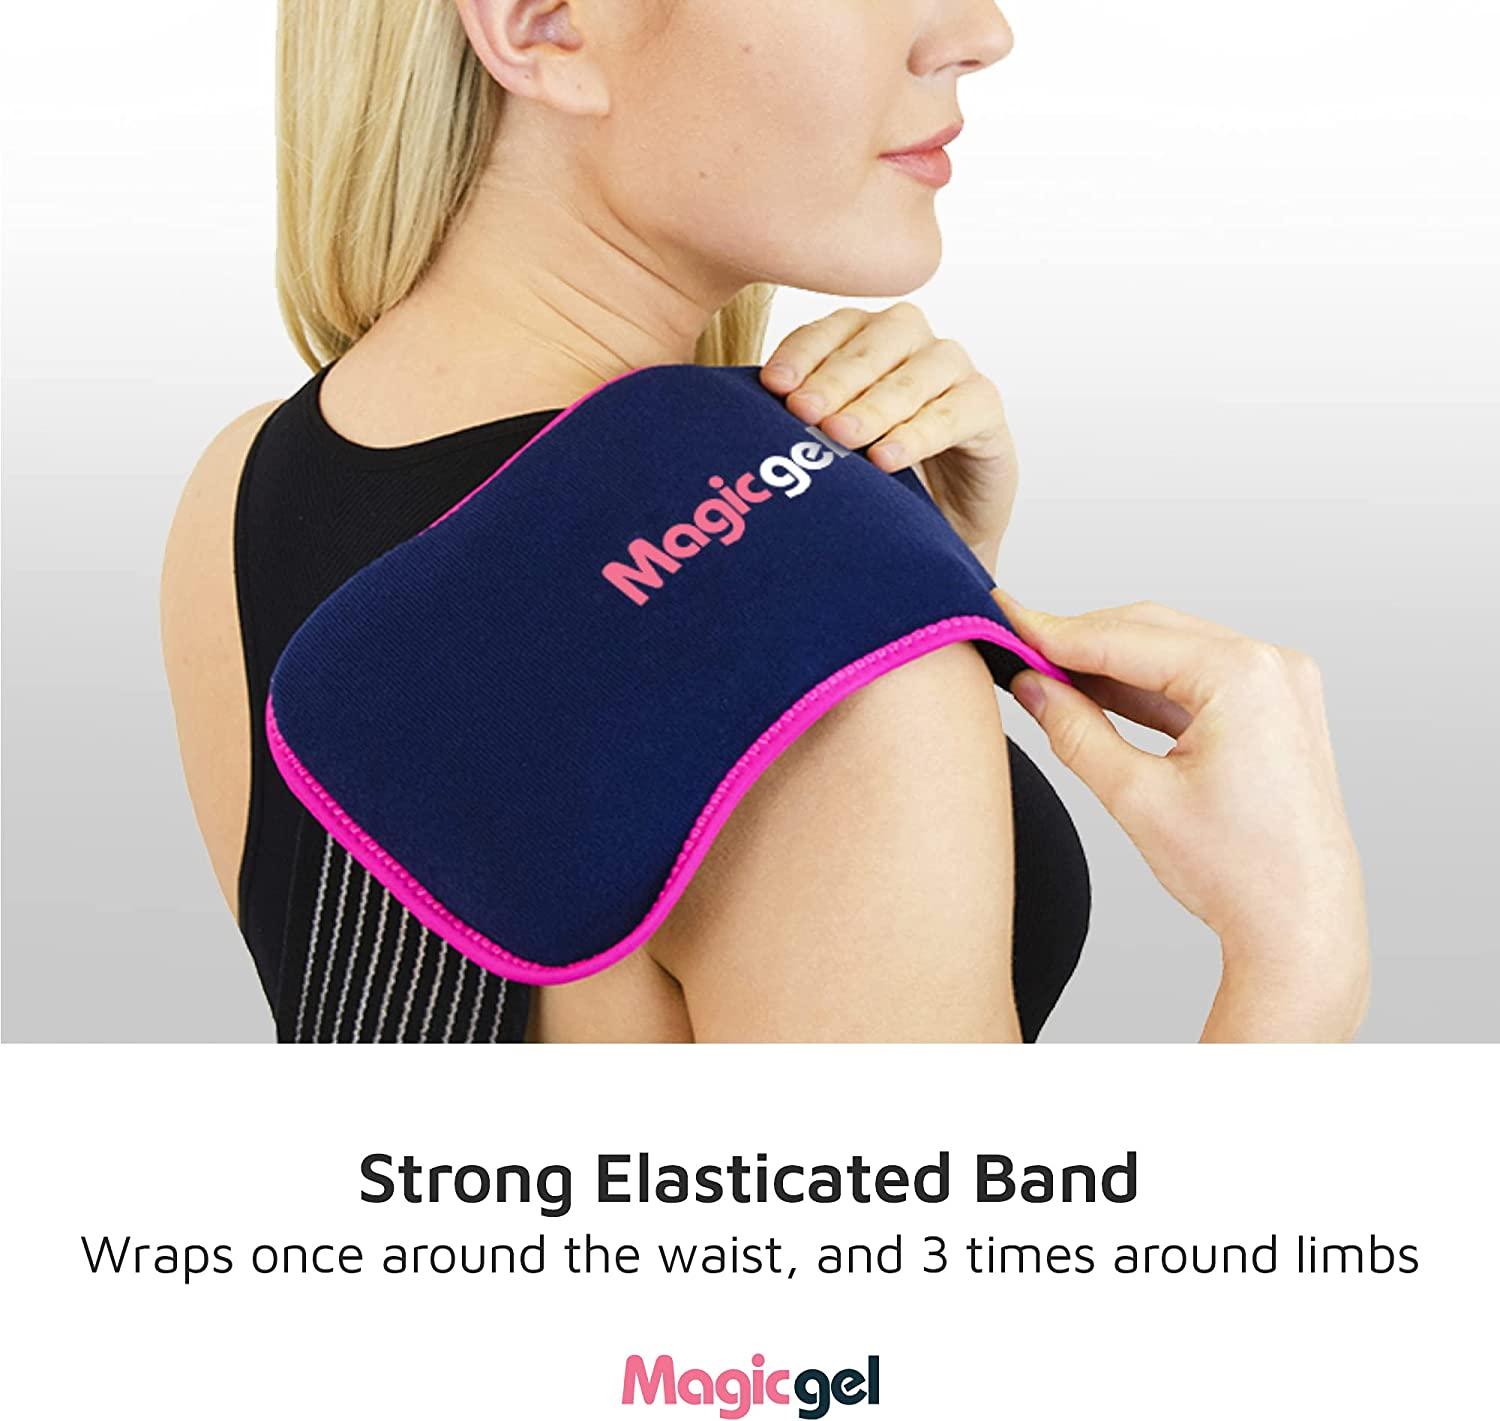 Magic Bag Neck To Back Compress And Magic Bag Warmy Review - OMC